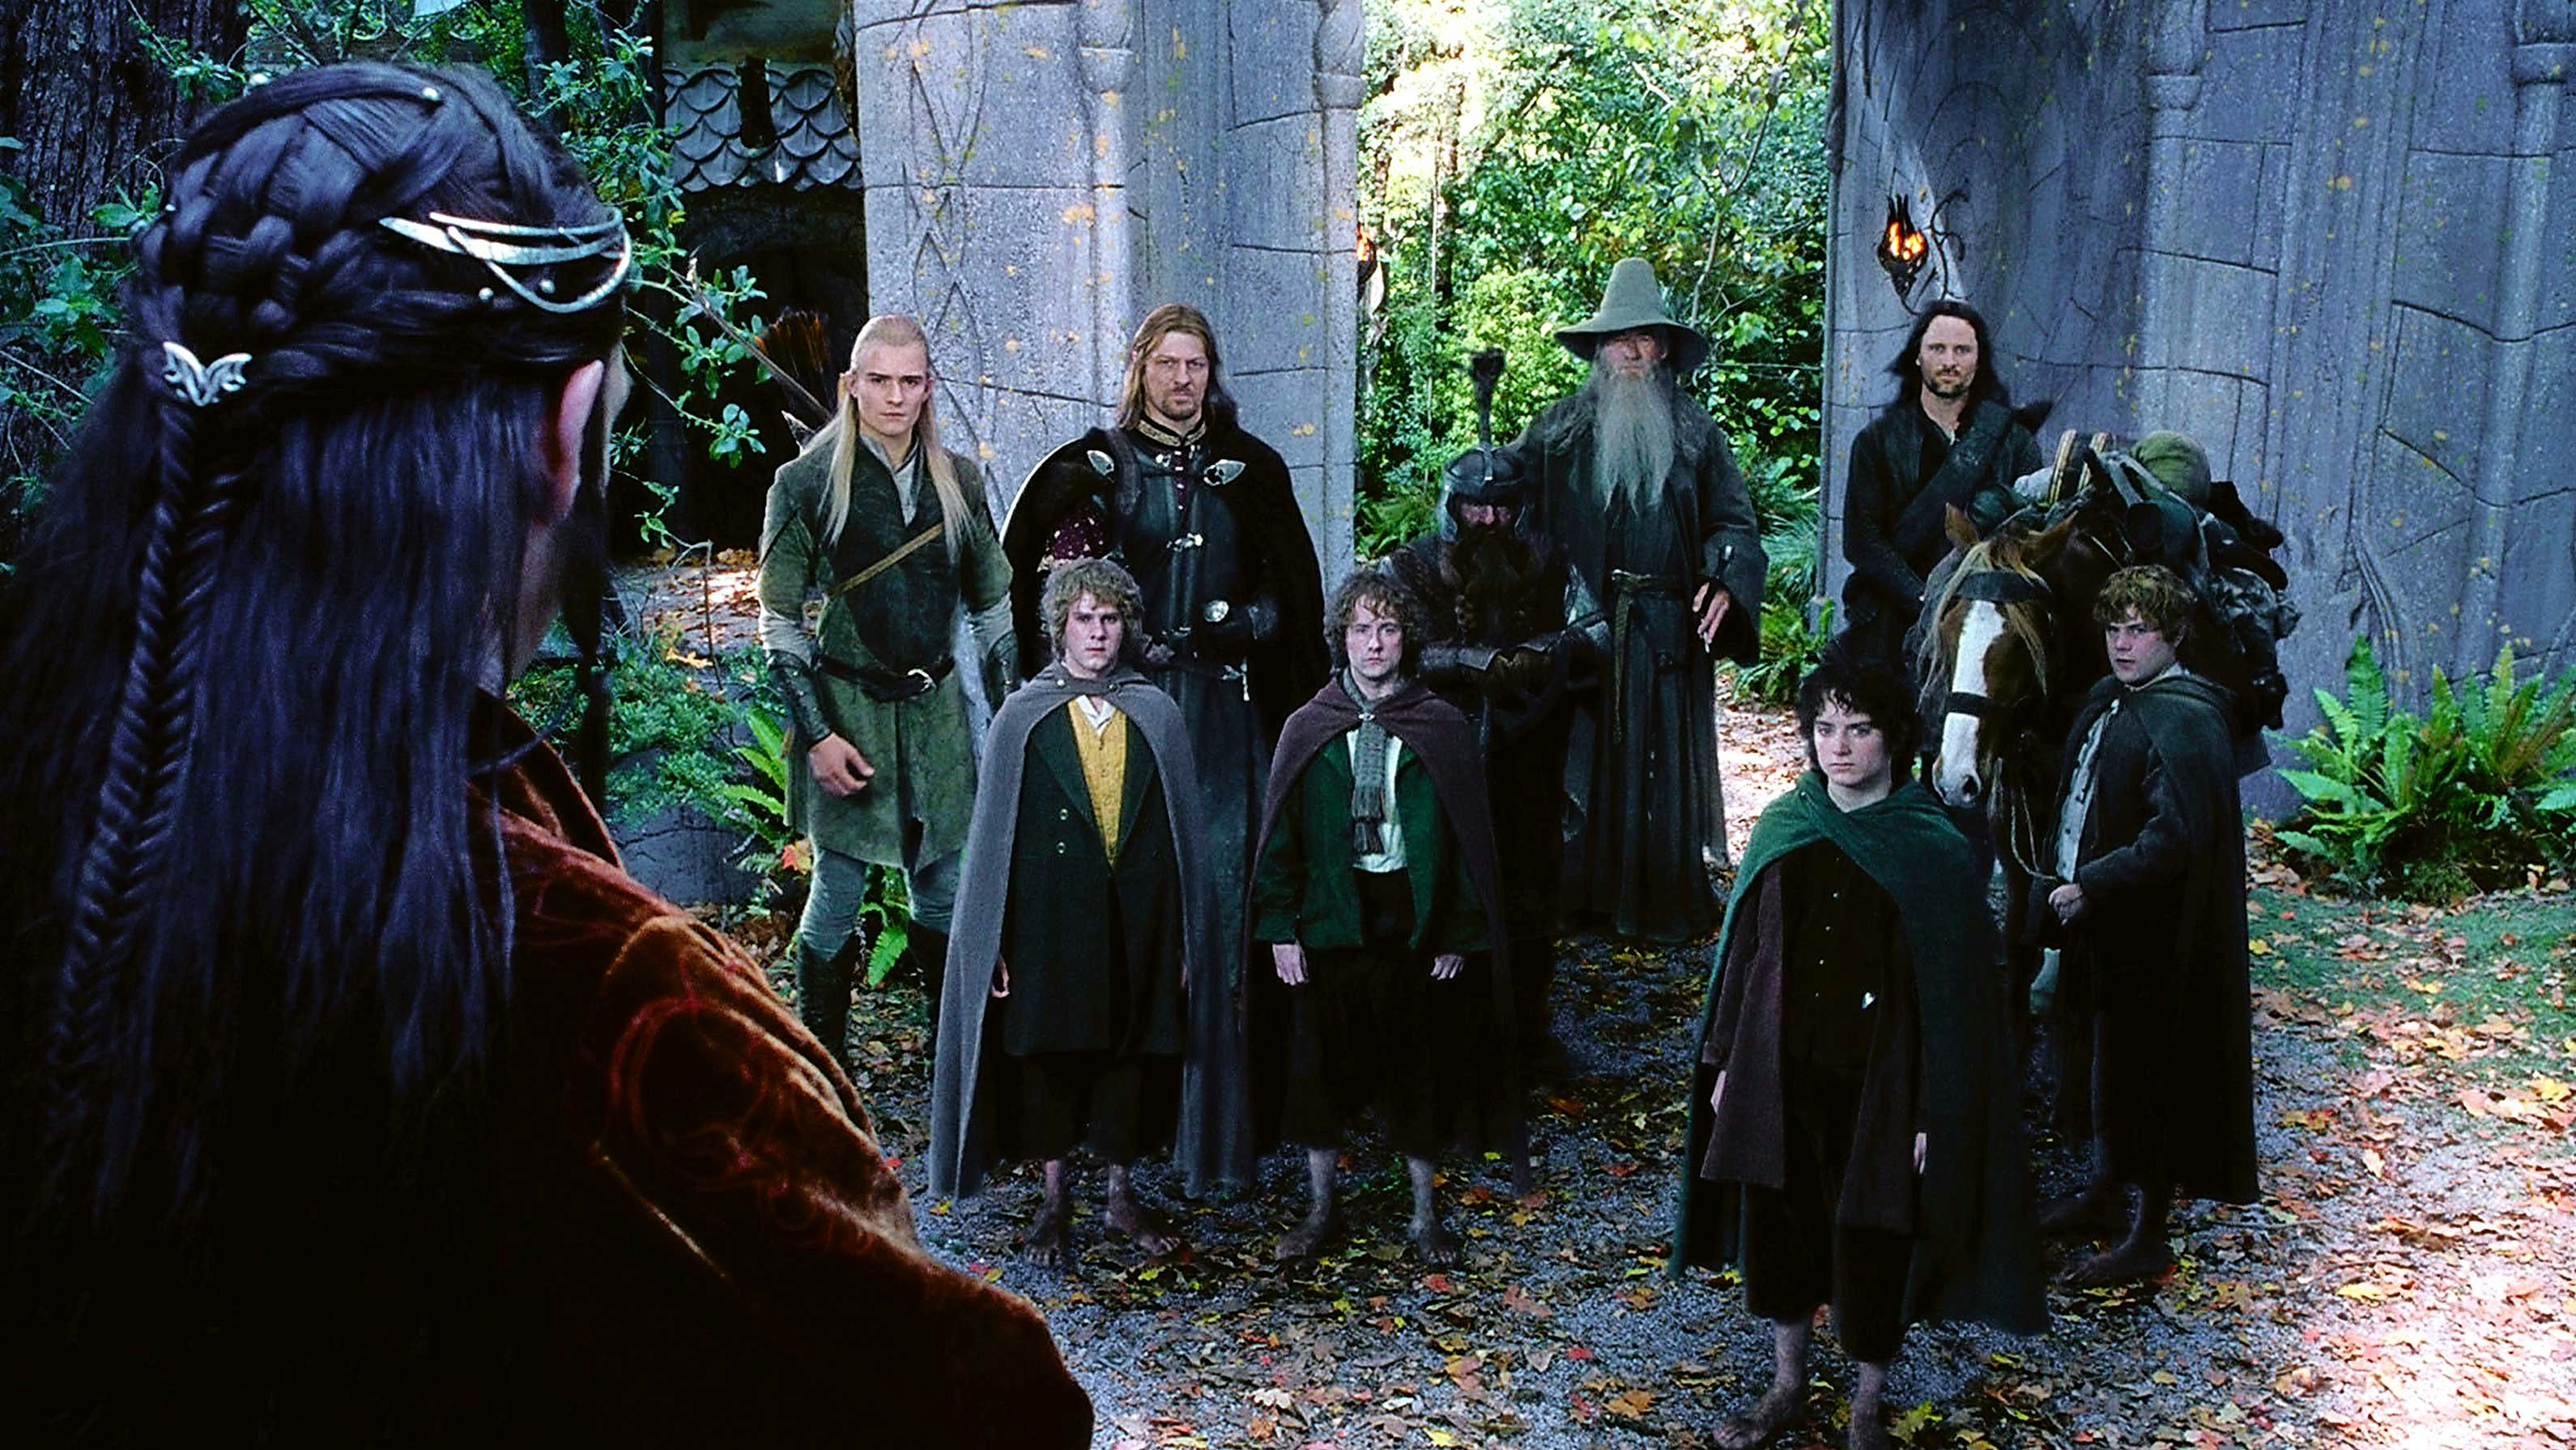 Lord of the Rings in a Nutshell: The Fellowship of the Ring in 5 minutes 